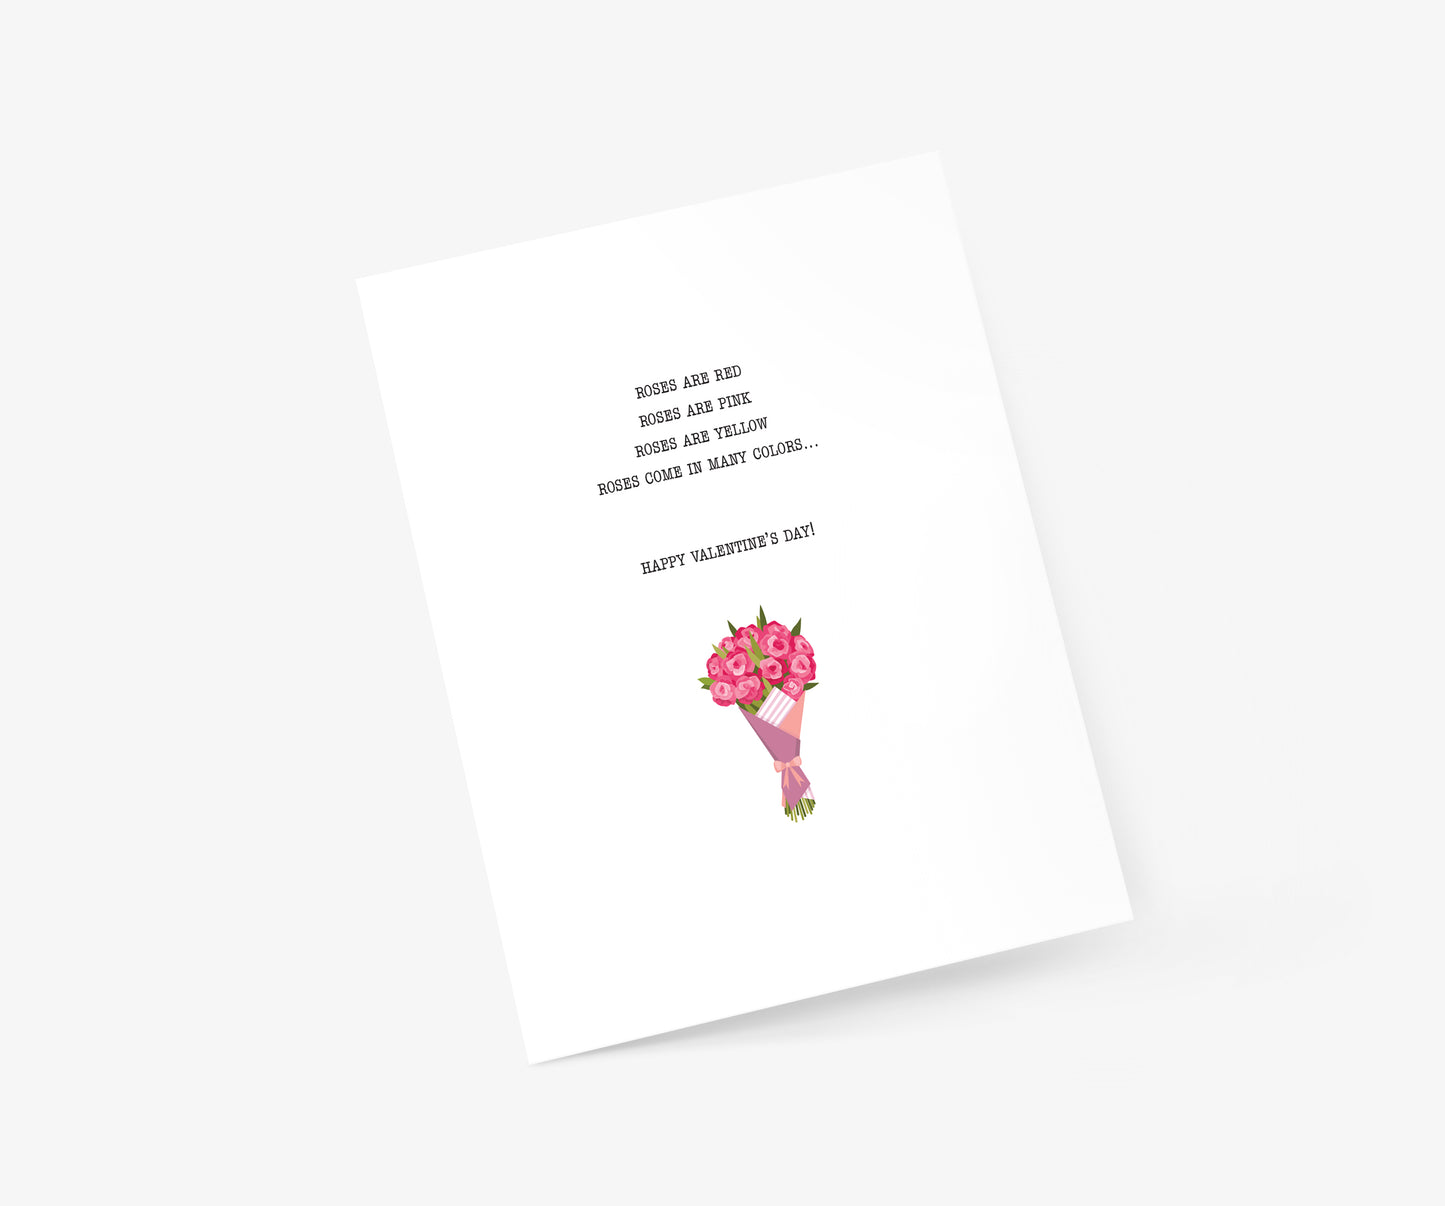 Roses Come In Many Colors - Valentine's Day Card | Footnotes Paper